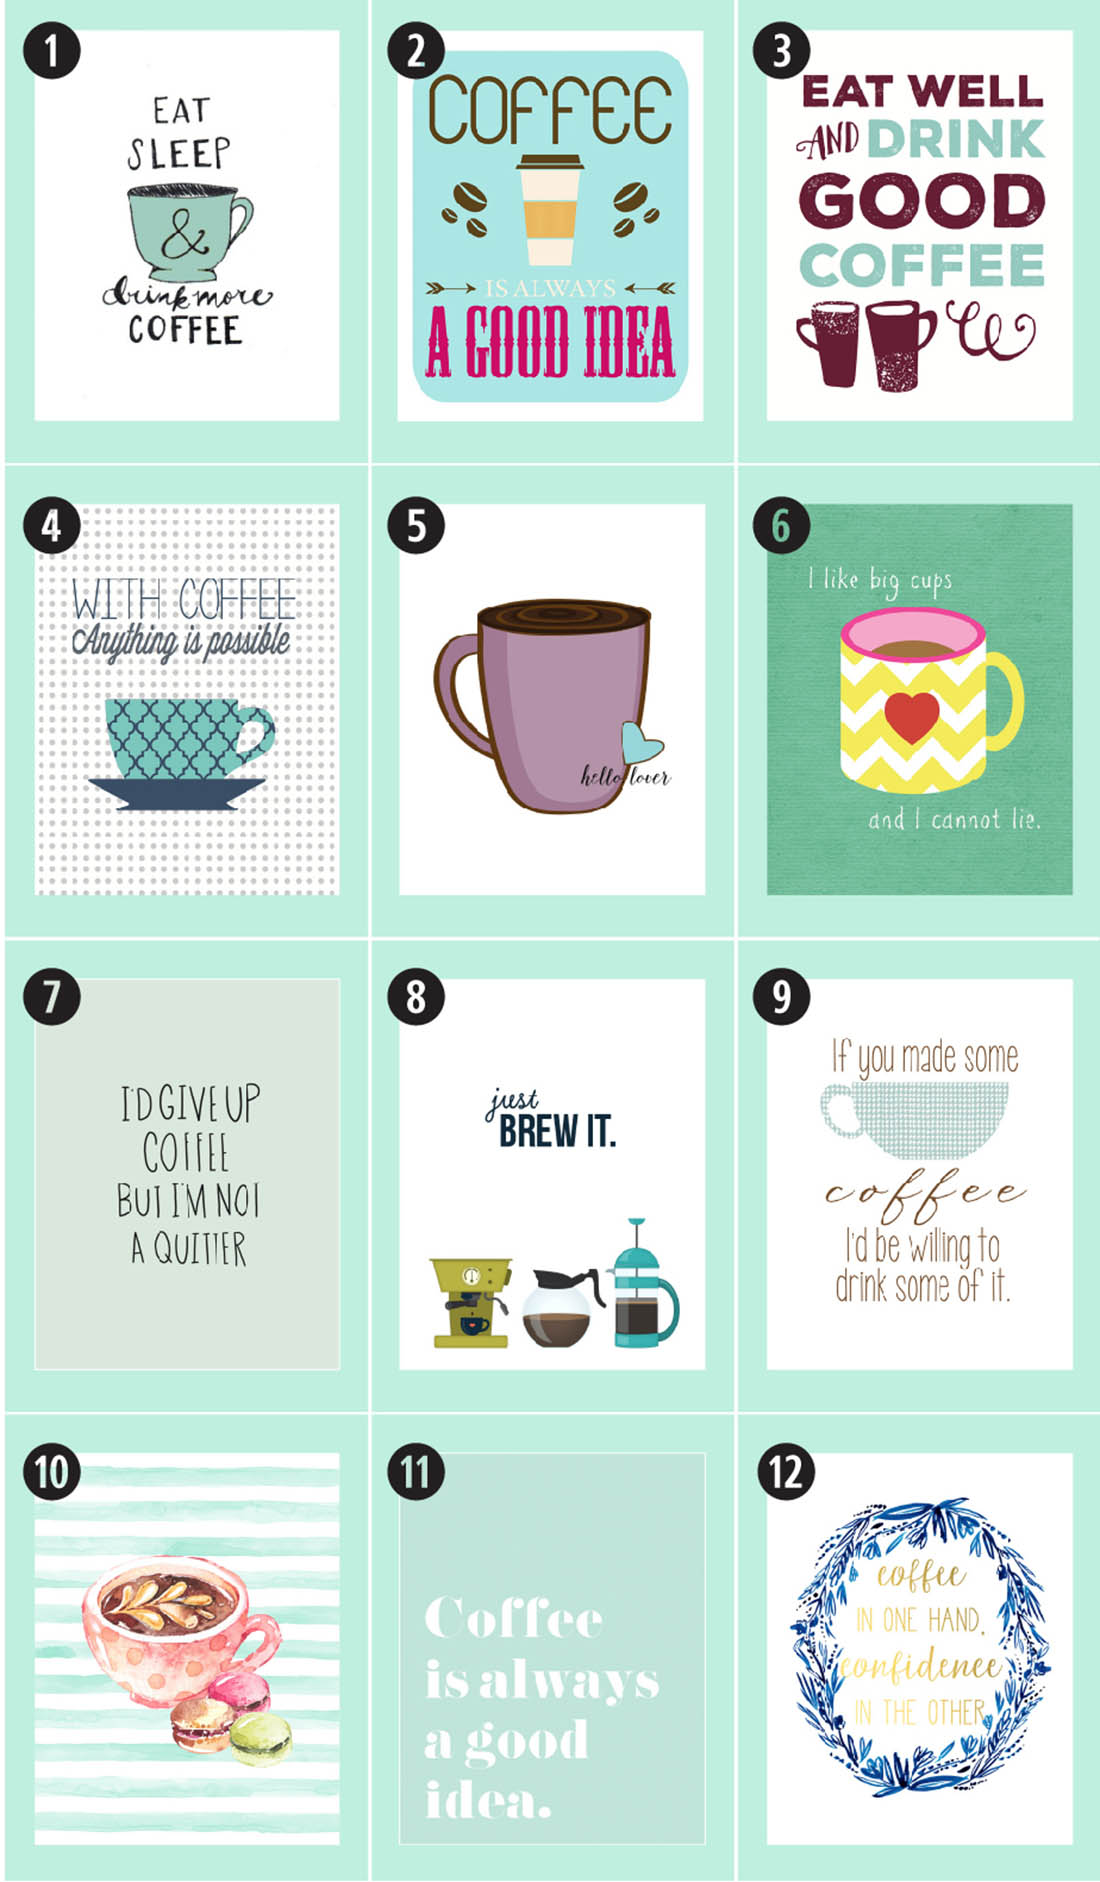 180+ Coffee Free Printables: The Ultimate Guide • Little Gold Pixel • Find the motherlode of curated coffee printables here. Click through to see more!